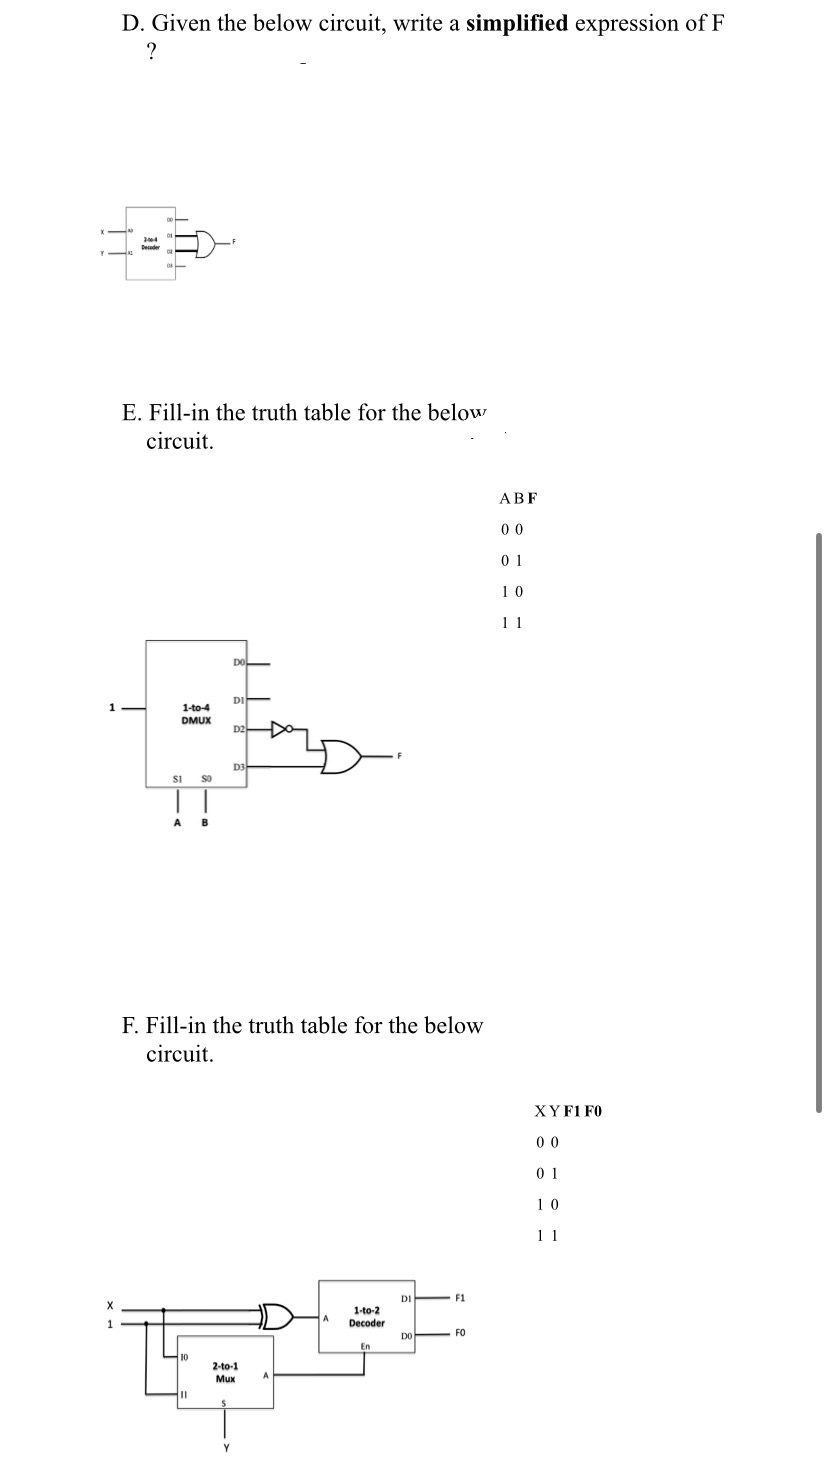 D. Given the below circuit, write a simplified expression of F ? X AL 1- 2004 Decoder 00 01 08 E. Fill-in the